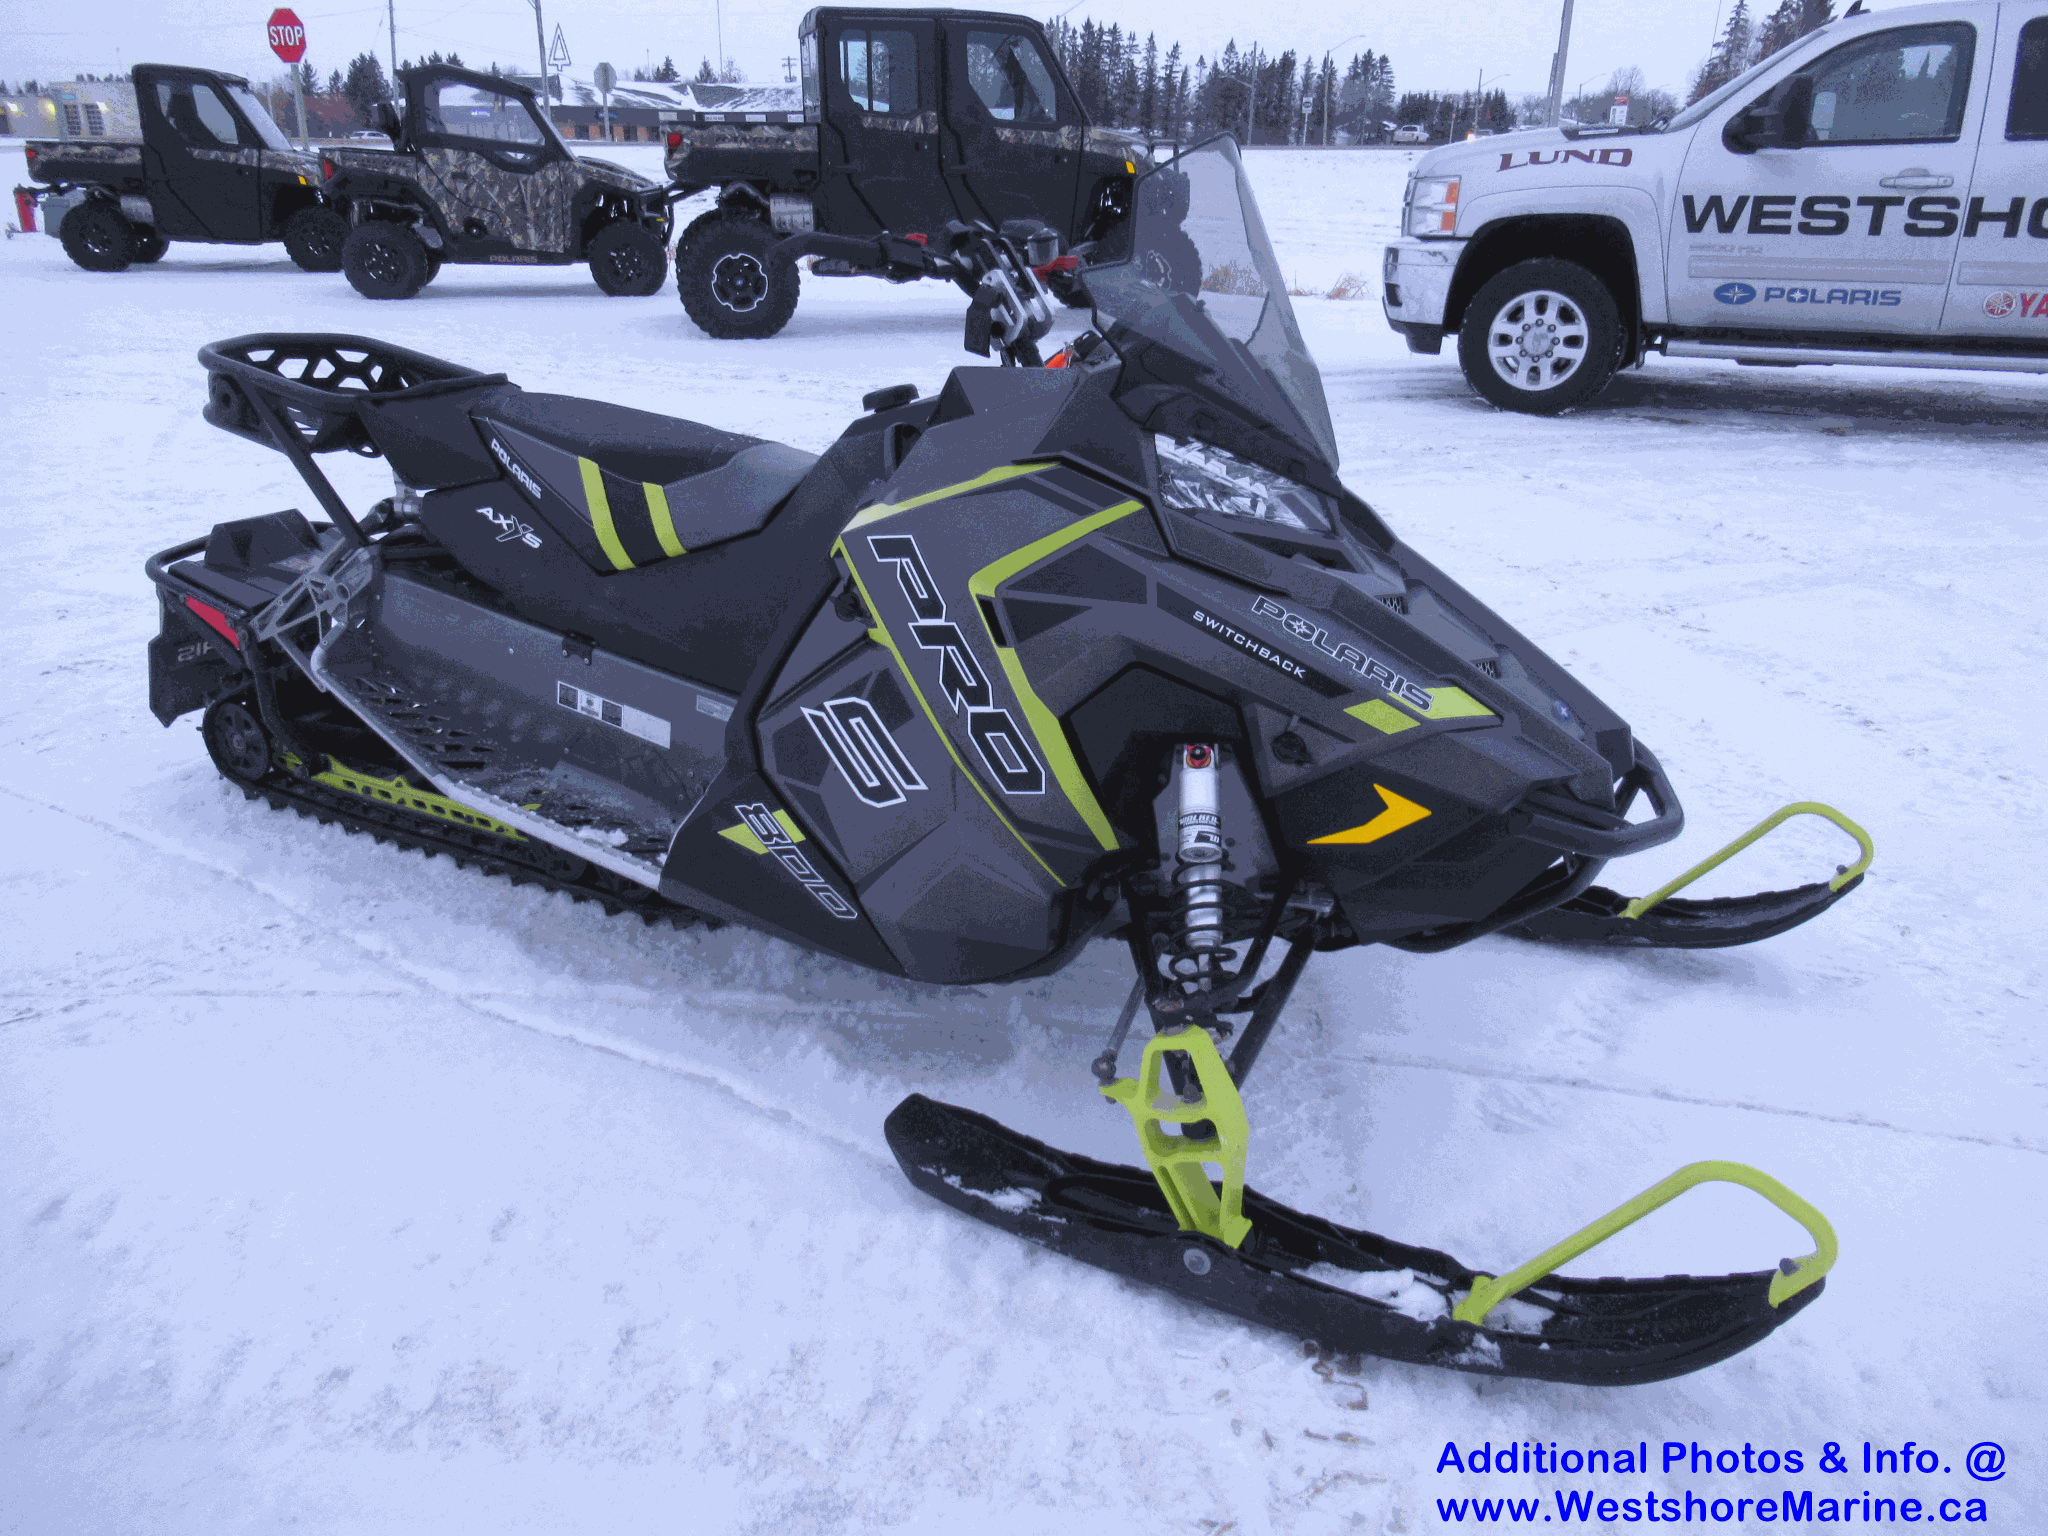 Pre Owned 17 Polaris 800 Switchback Pro S Le Gps Electric Start Snowmobile In Arborg 7361 Westshore Marine Leisure